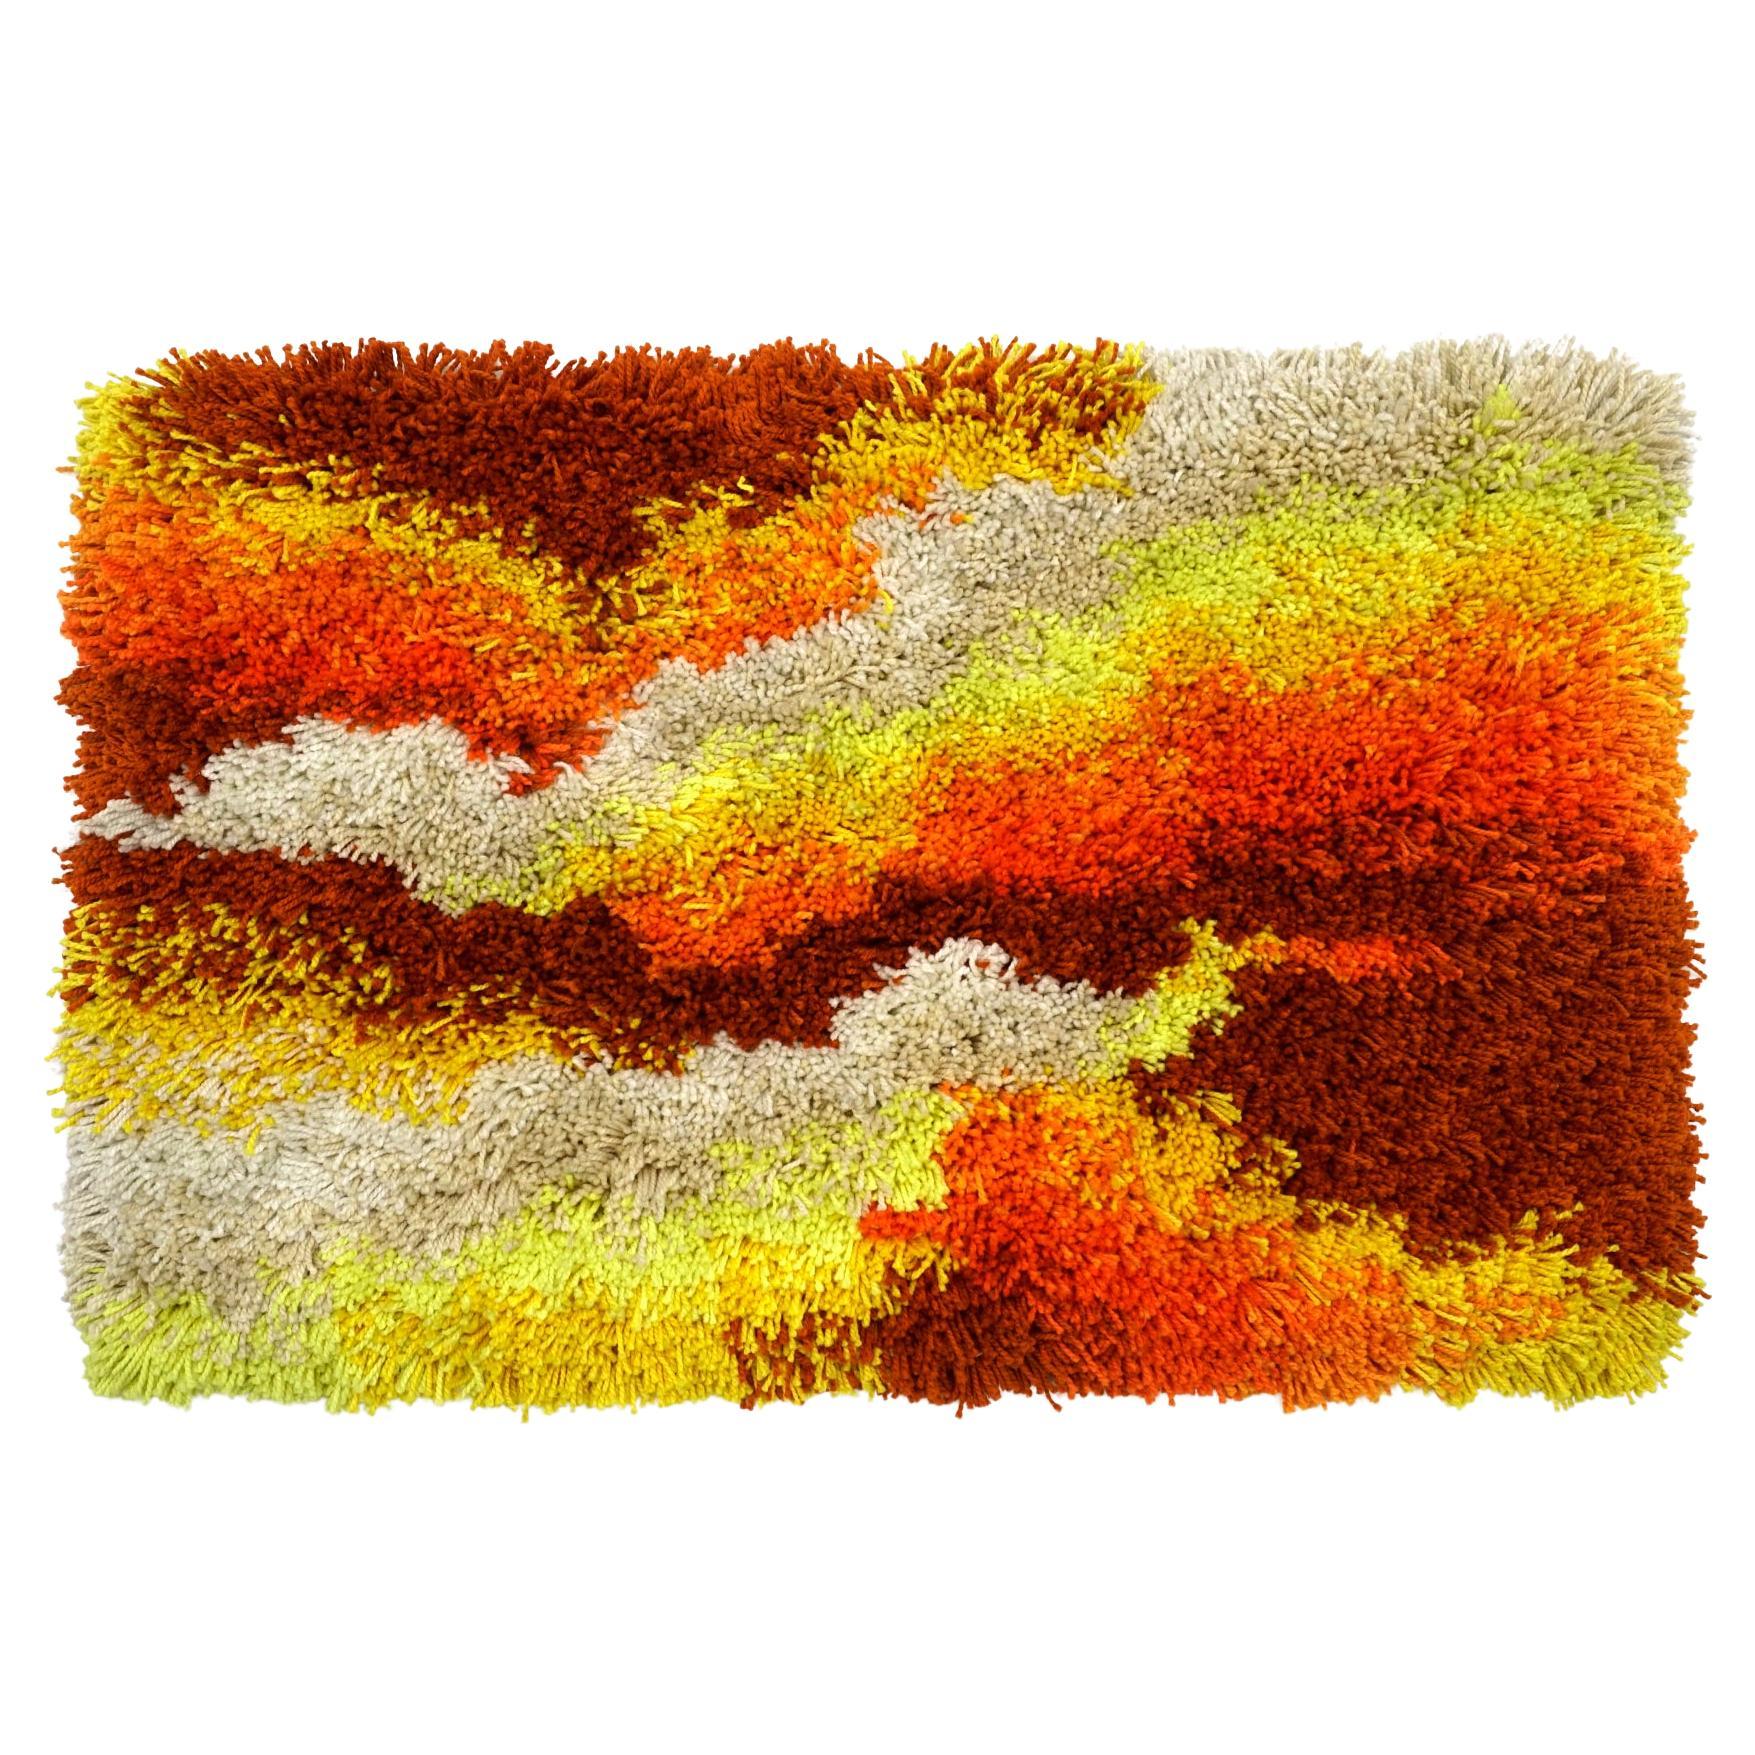 3 by 5 Rya Rug / Tapestry in Orange, Yellow, off White, Never on the Floor For Sale